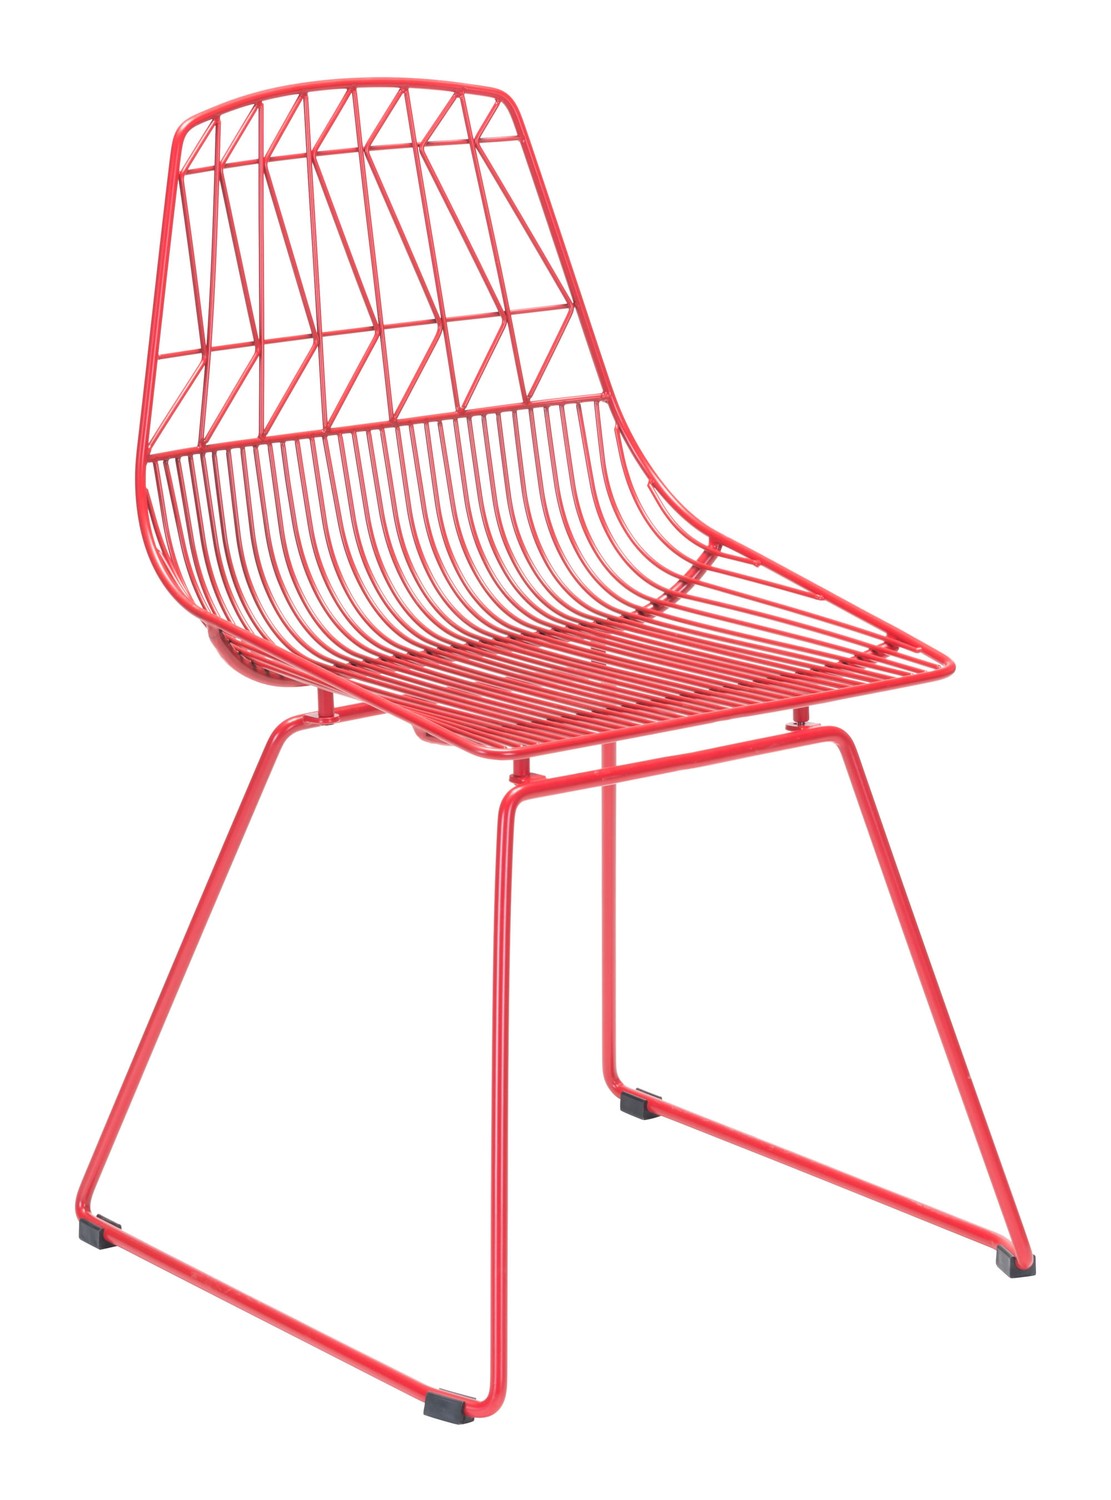 20.9" x 20.9" x 32.7" Red, Steel, Dining Chair - Set of 2